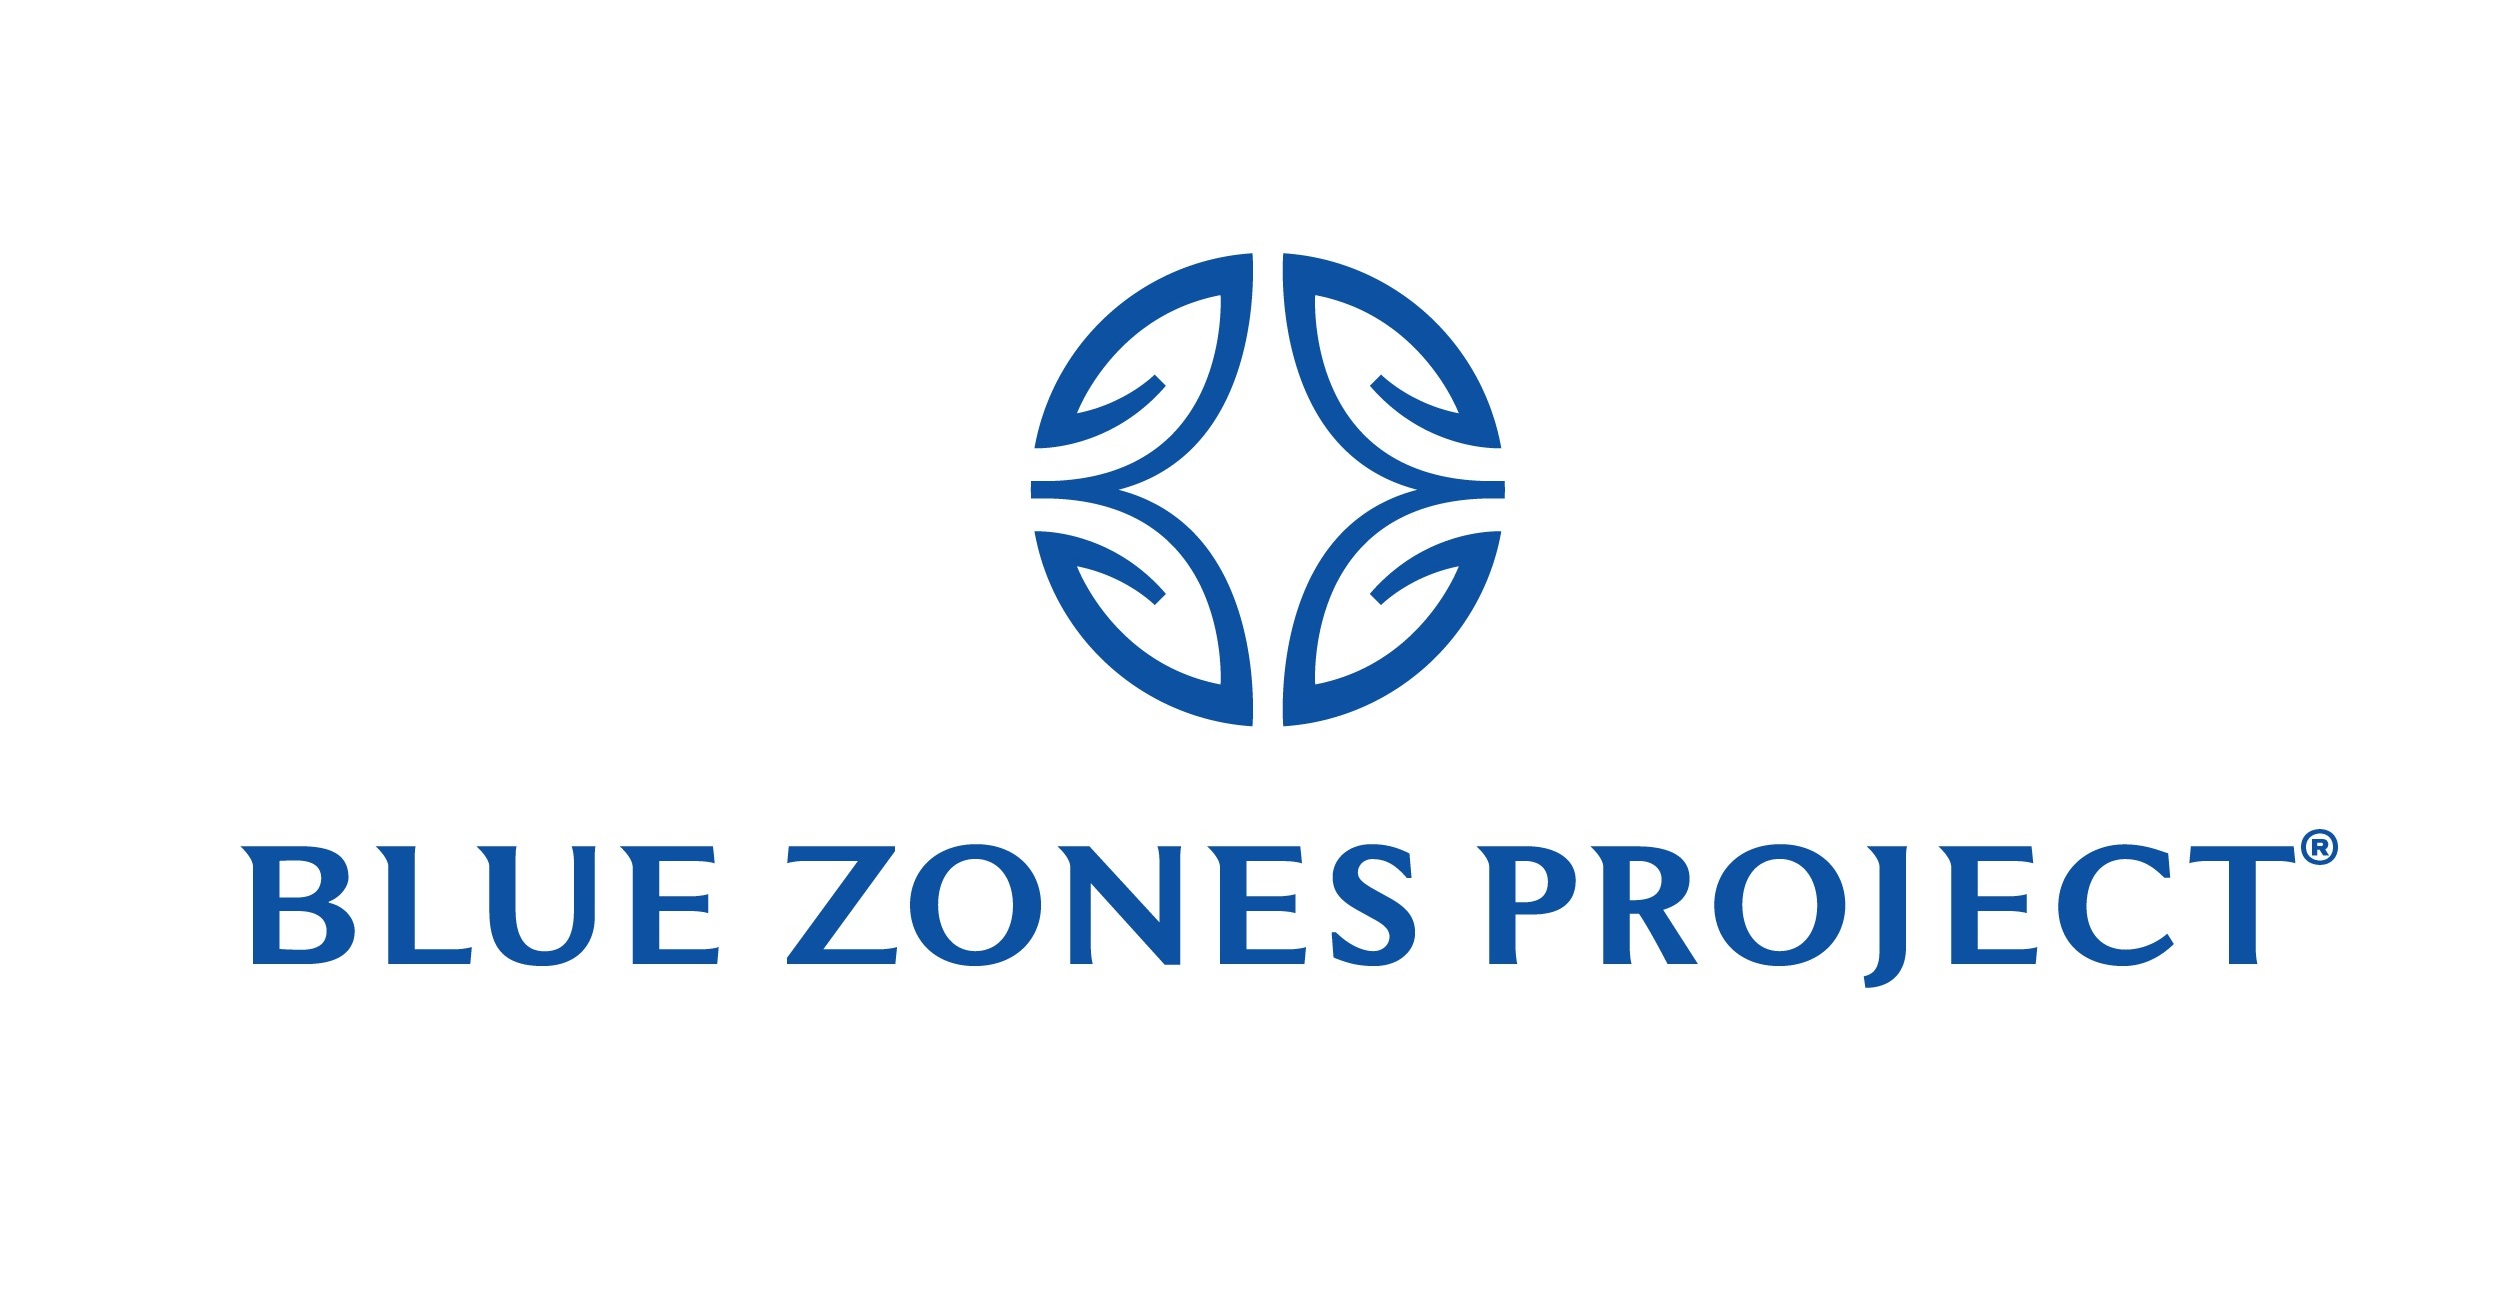  BLUE ZONES PROJECT LAUNCHES IN PARKLAND AND SPANAWAY IN WASHINGTON STATE 